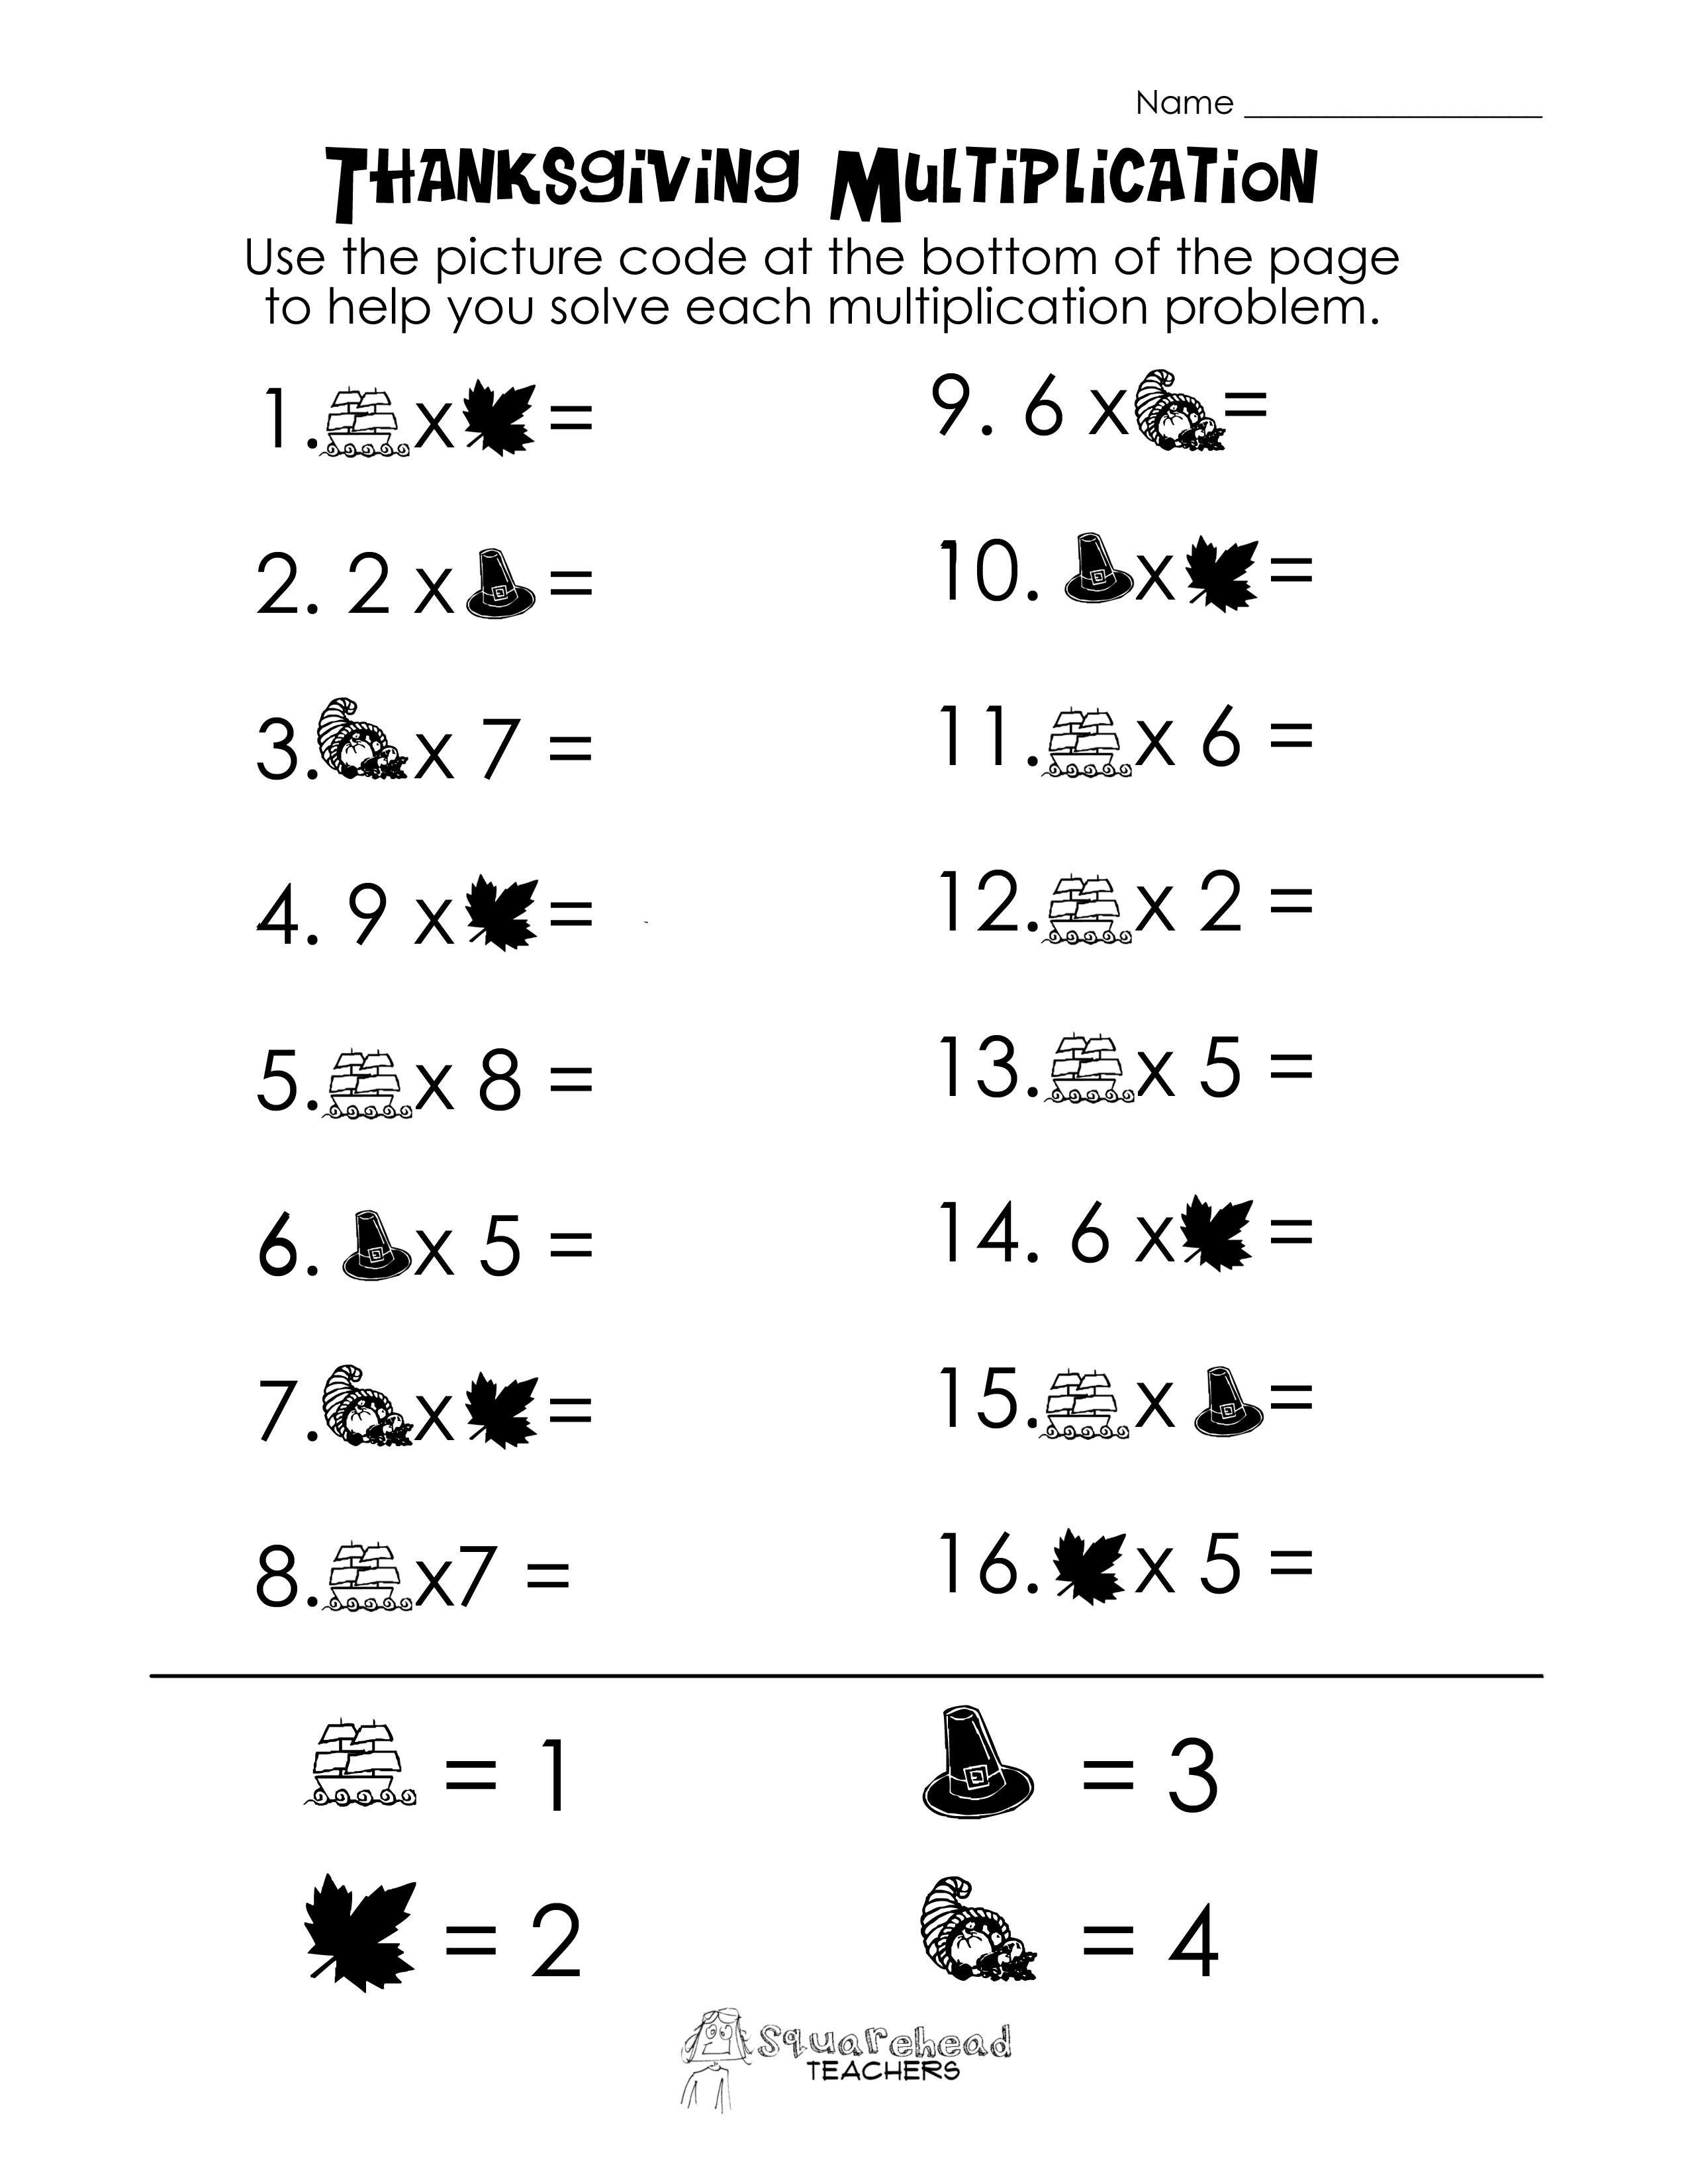 thanks-picture-multiplication